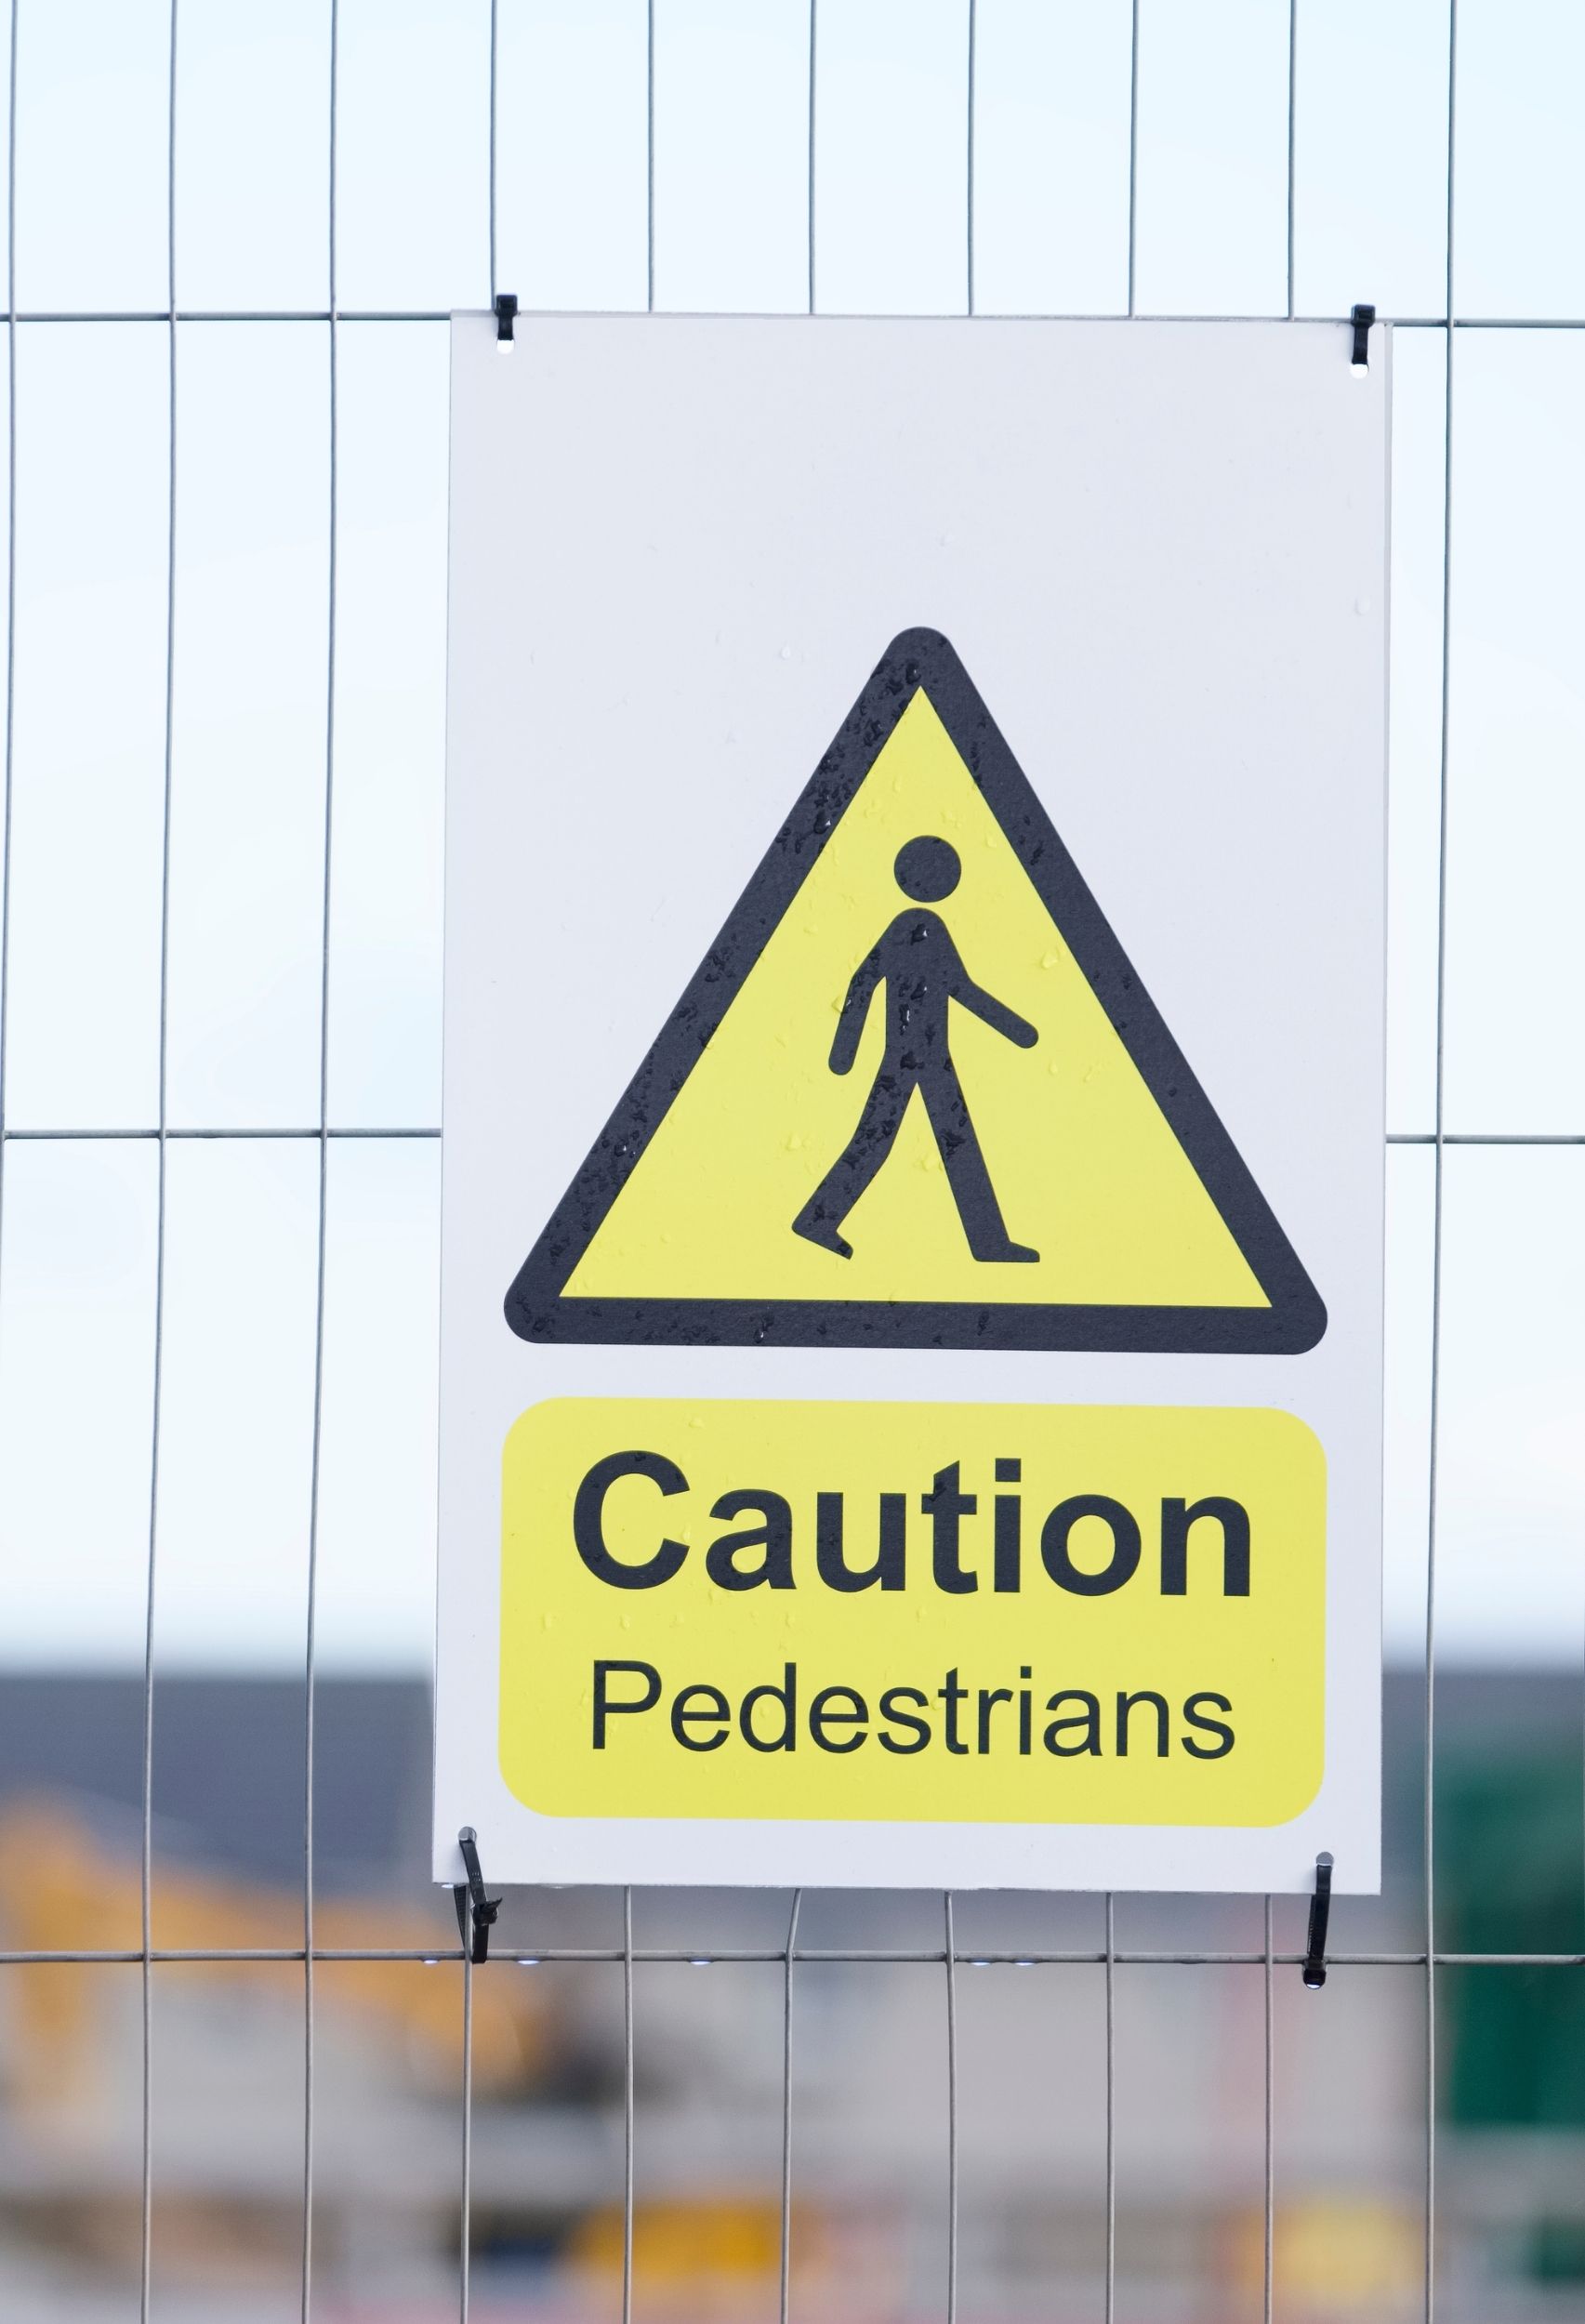 Understanding What Construction Safety Signs Mean - Rita Reviews